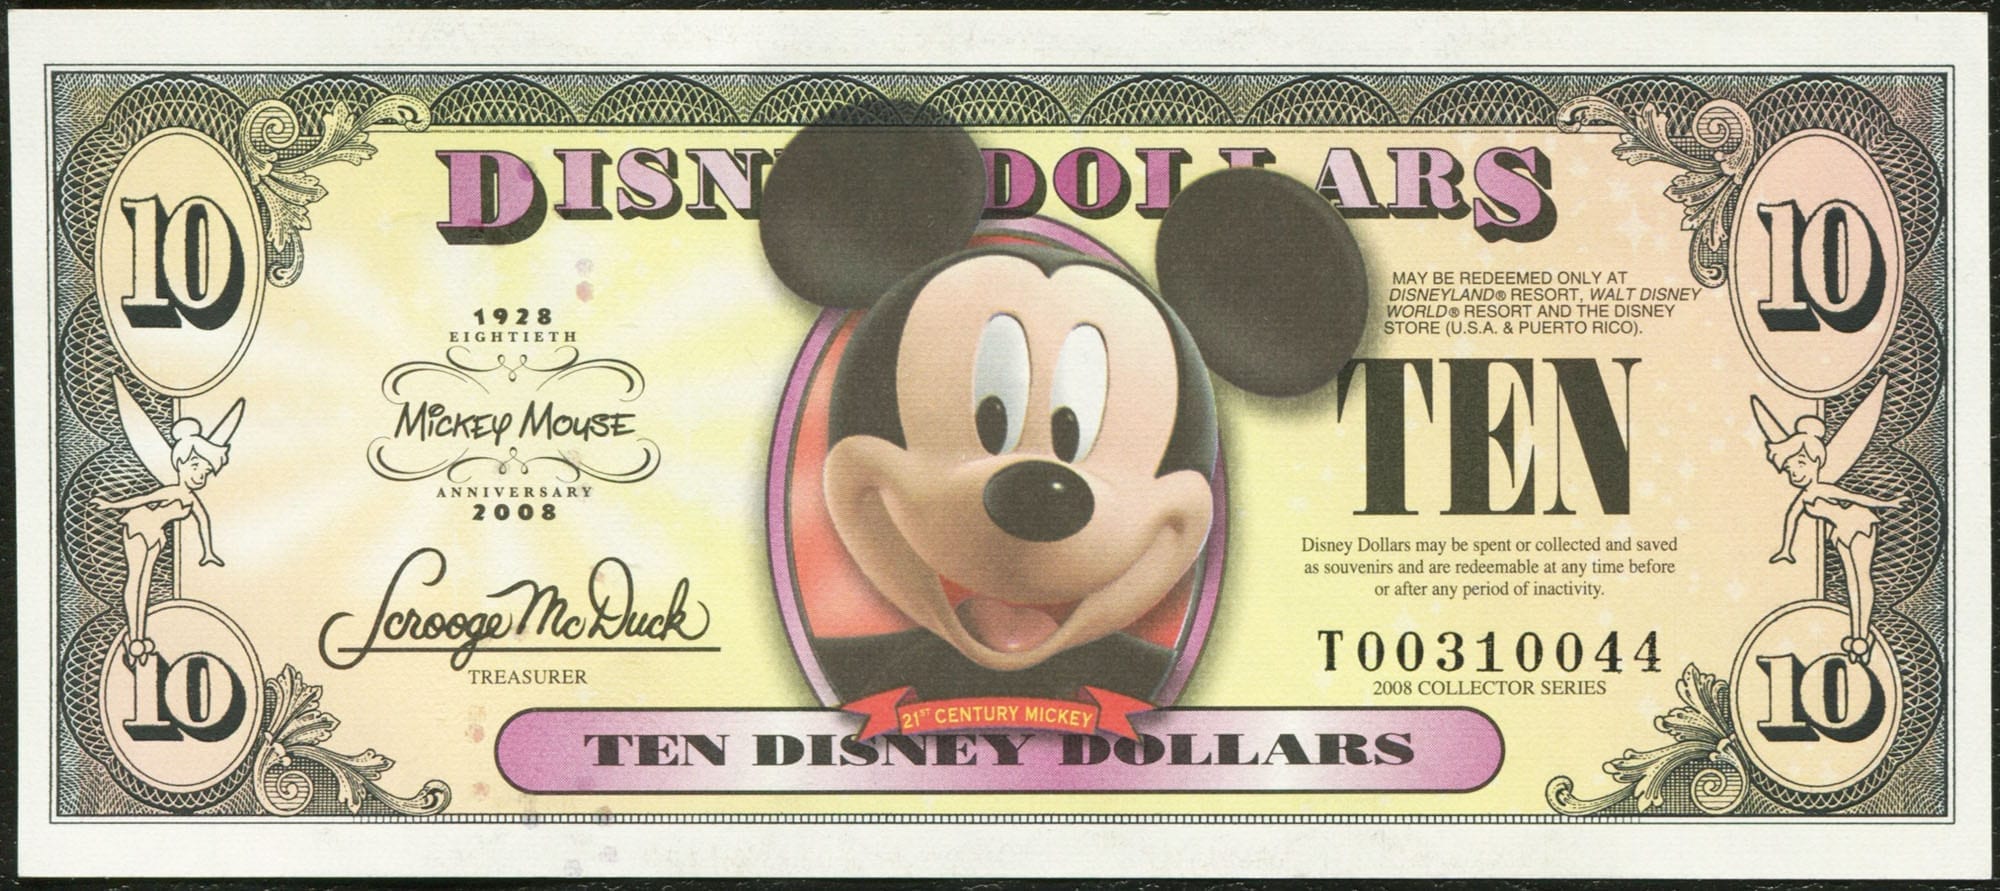 12 Tips for Tipping at Disney World – DisneyLists.com